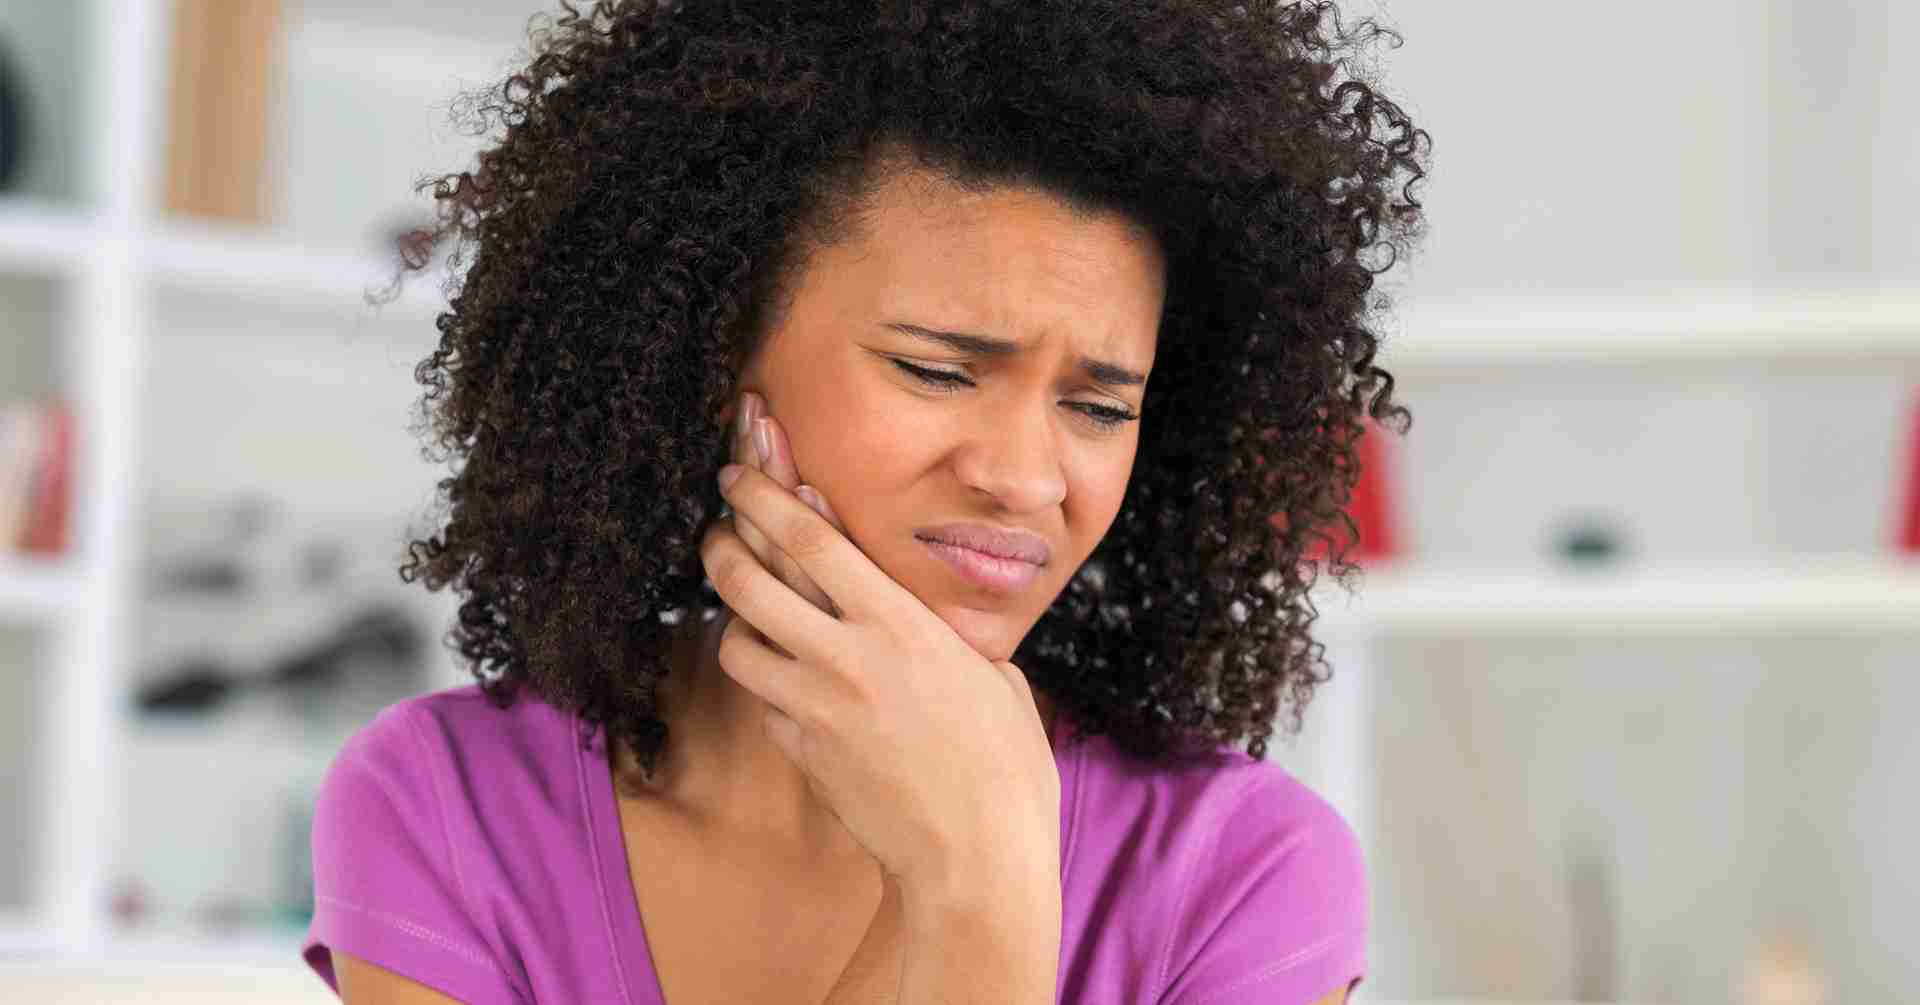 Dental pain – causes and treatment